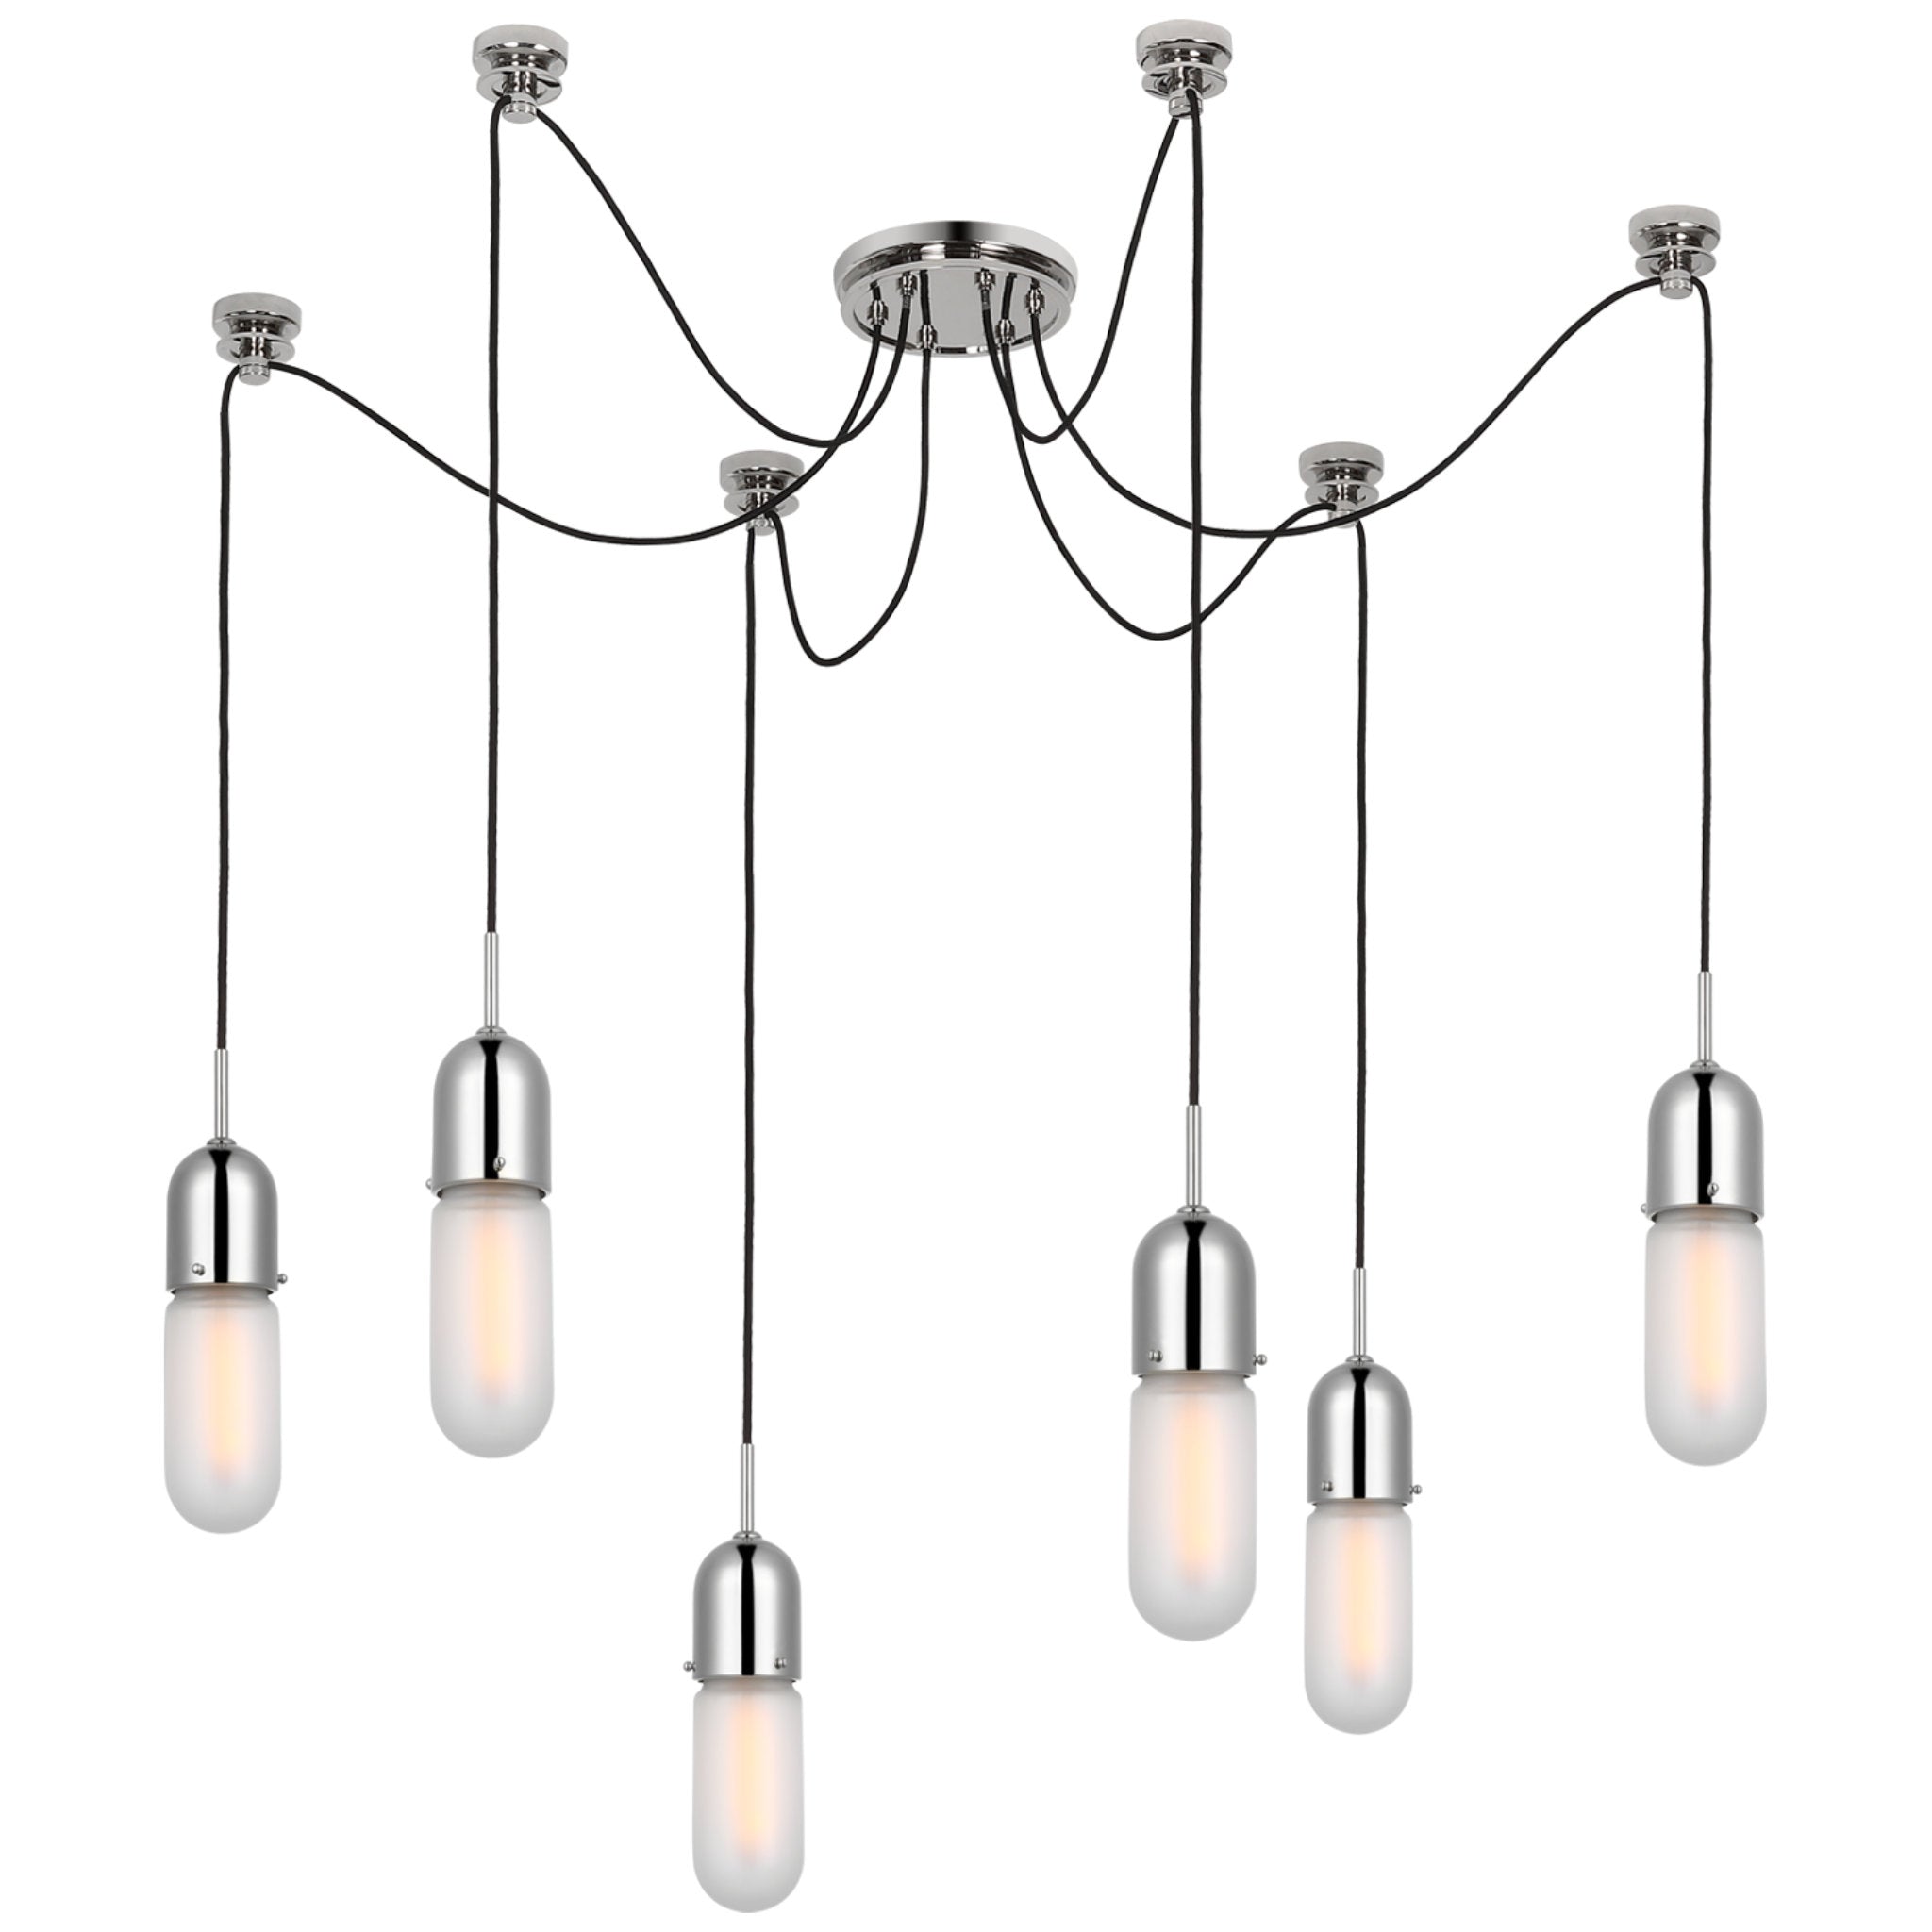 Thomas O'Brien Junio 6-Light Chandelier in Polished Nickel with Frosted Glass